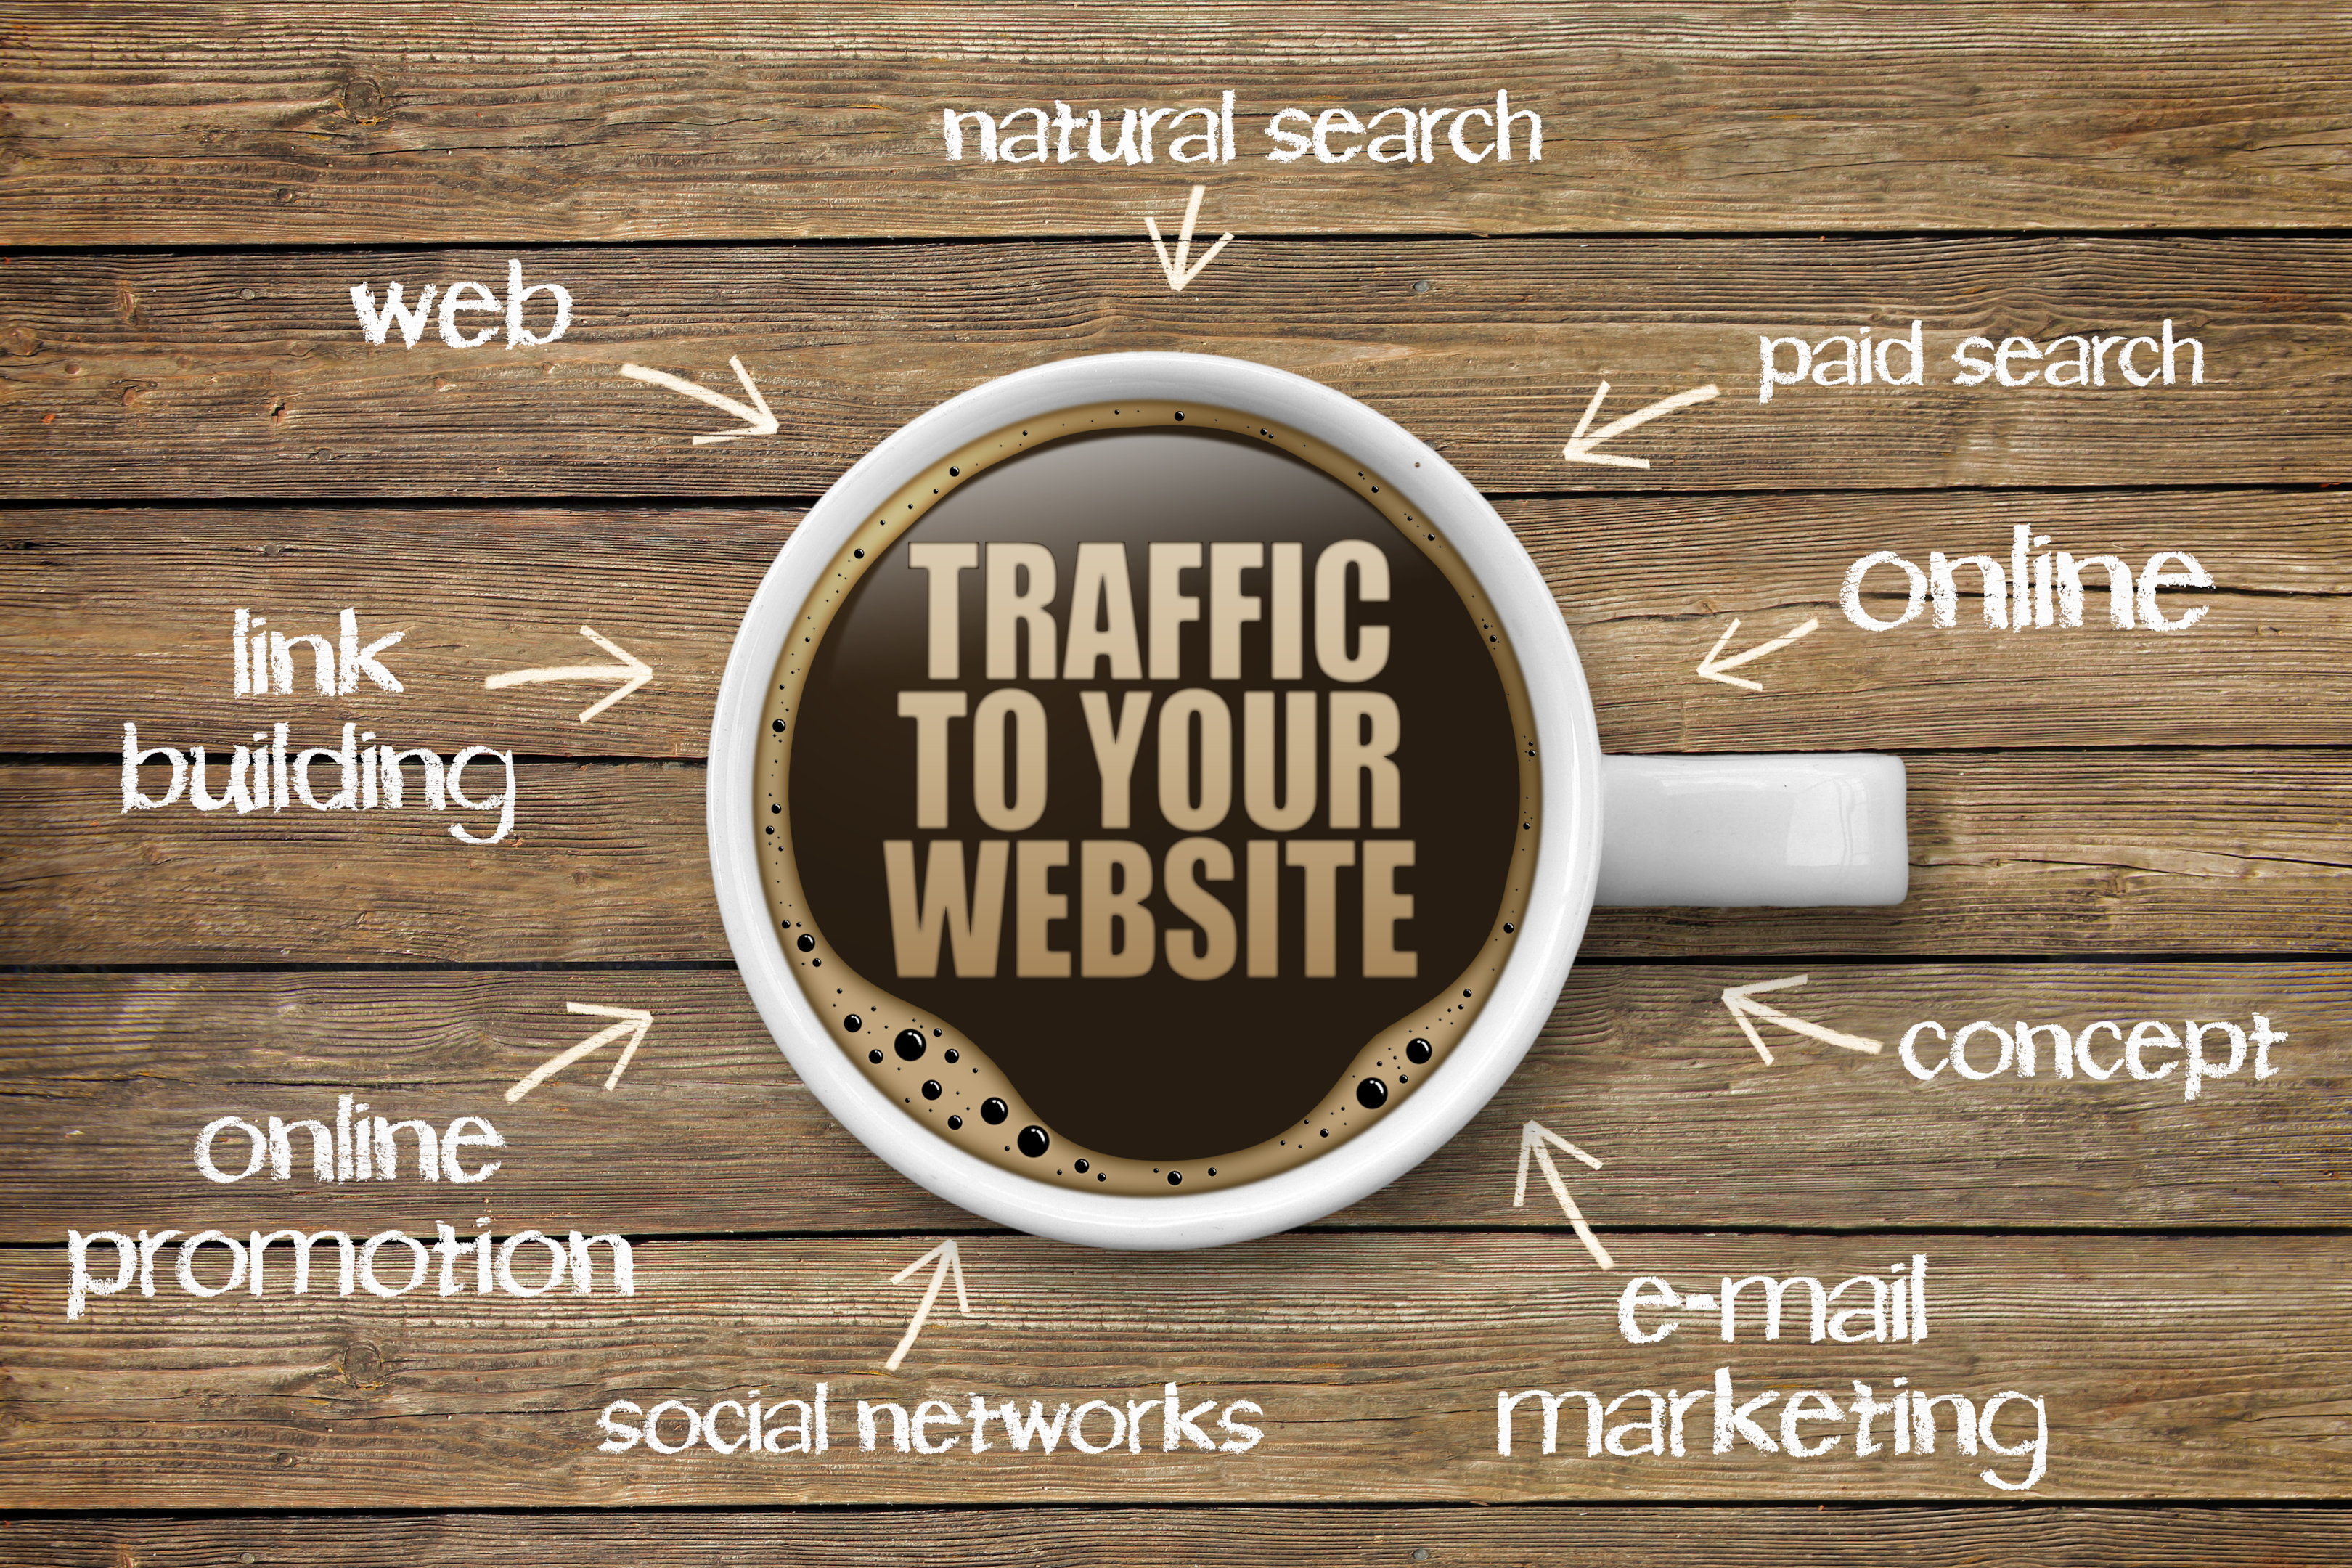 Website traffic comes from many sources. Your site can benefit from paid search when it is used effectively. 